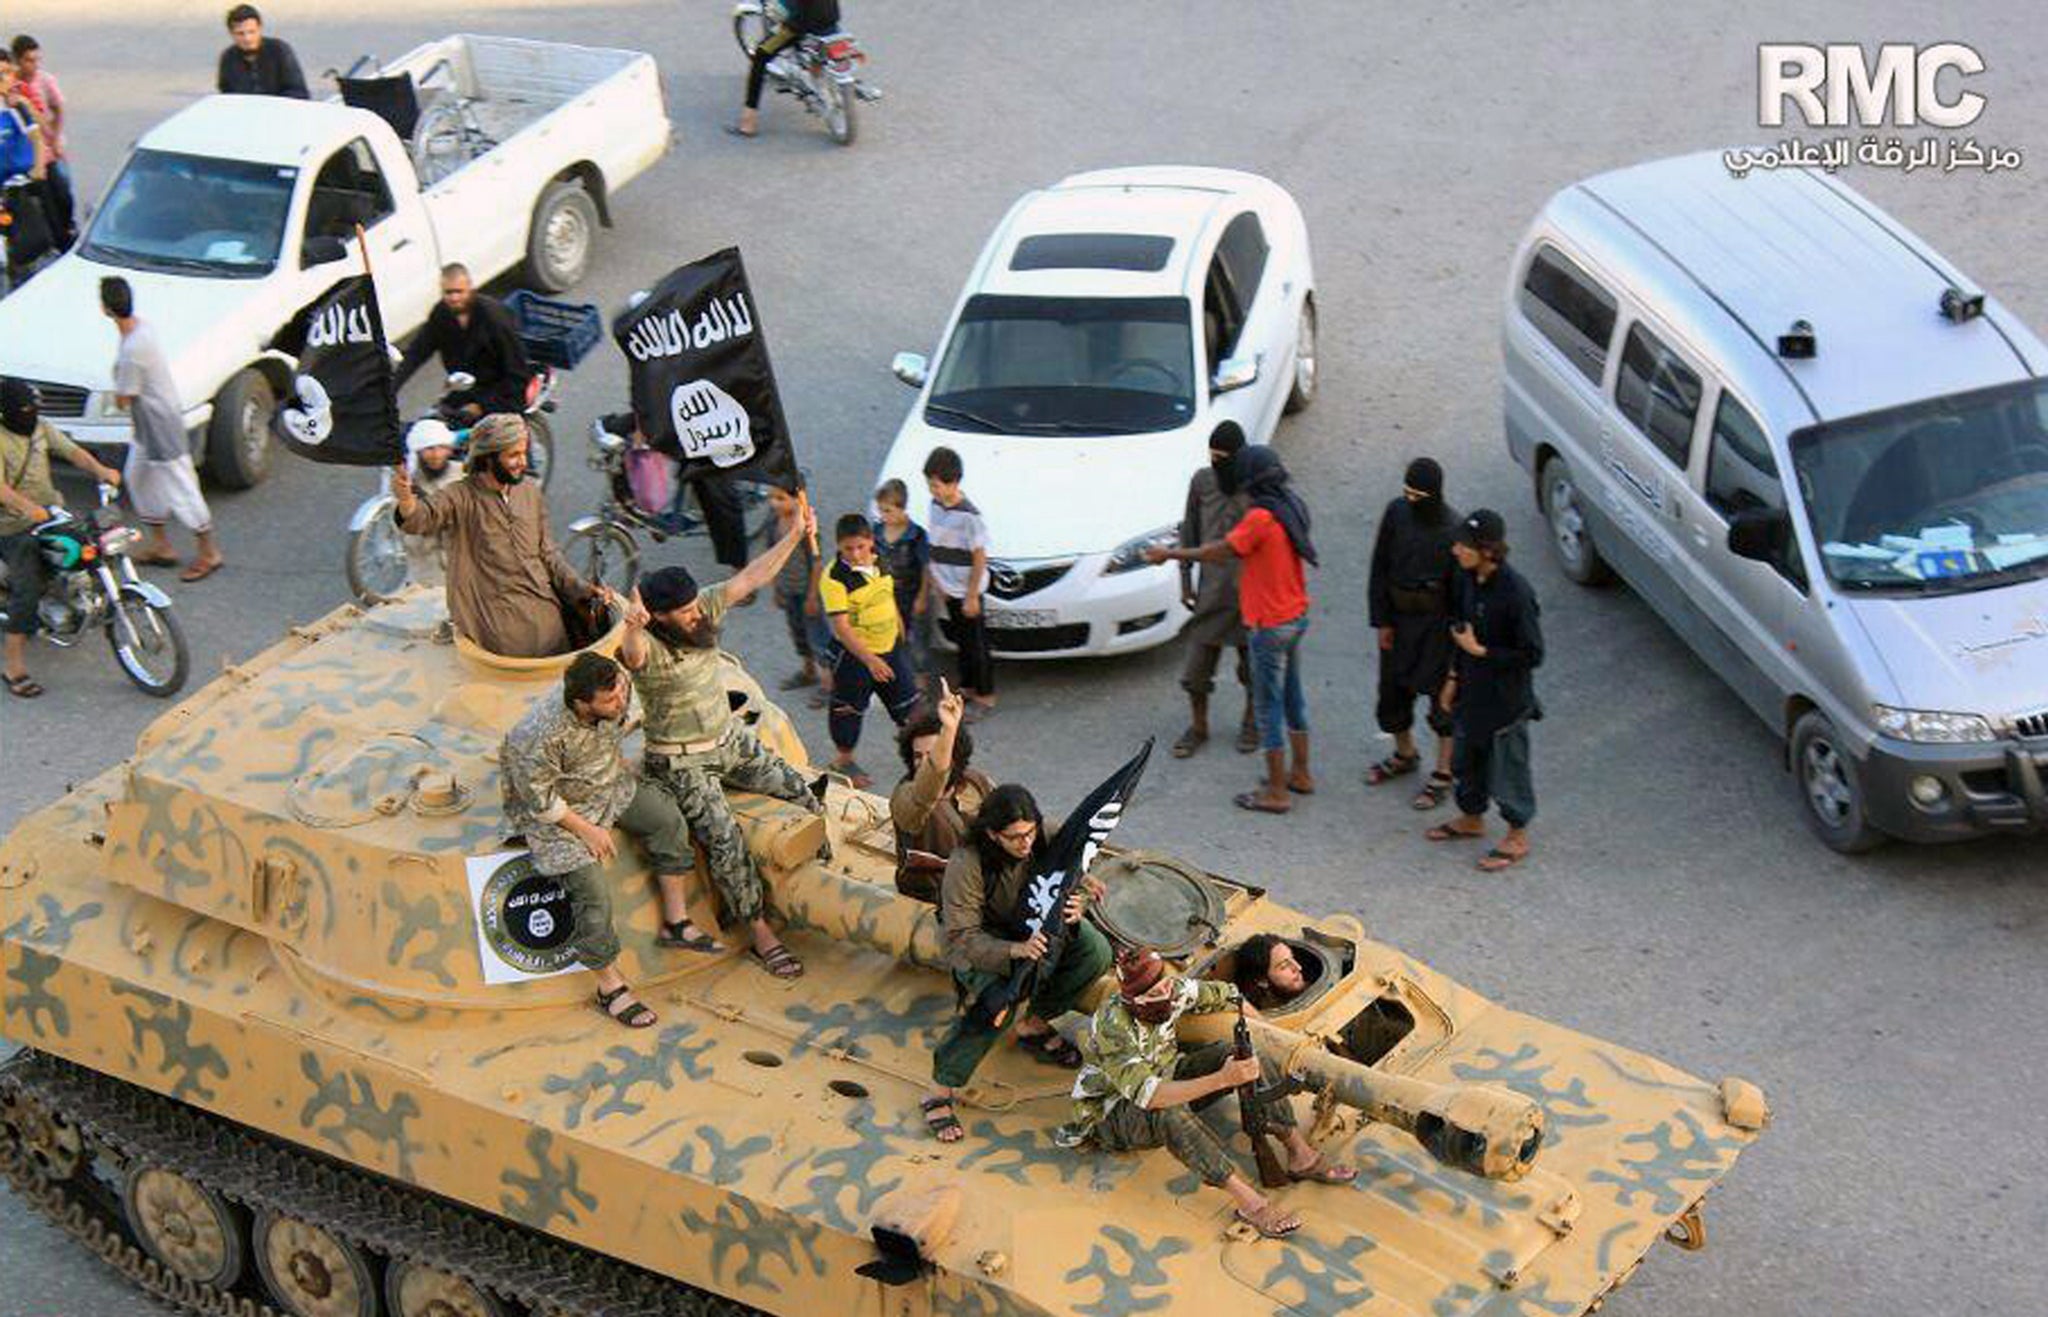 Fighters from Islamic State group sit on their tank during a parade in Raqqa, Syria